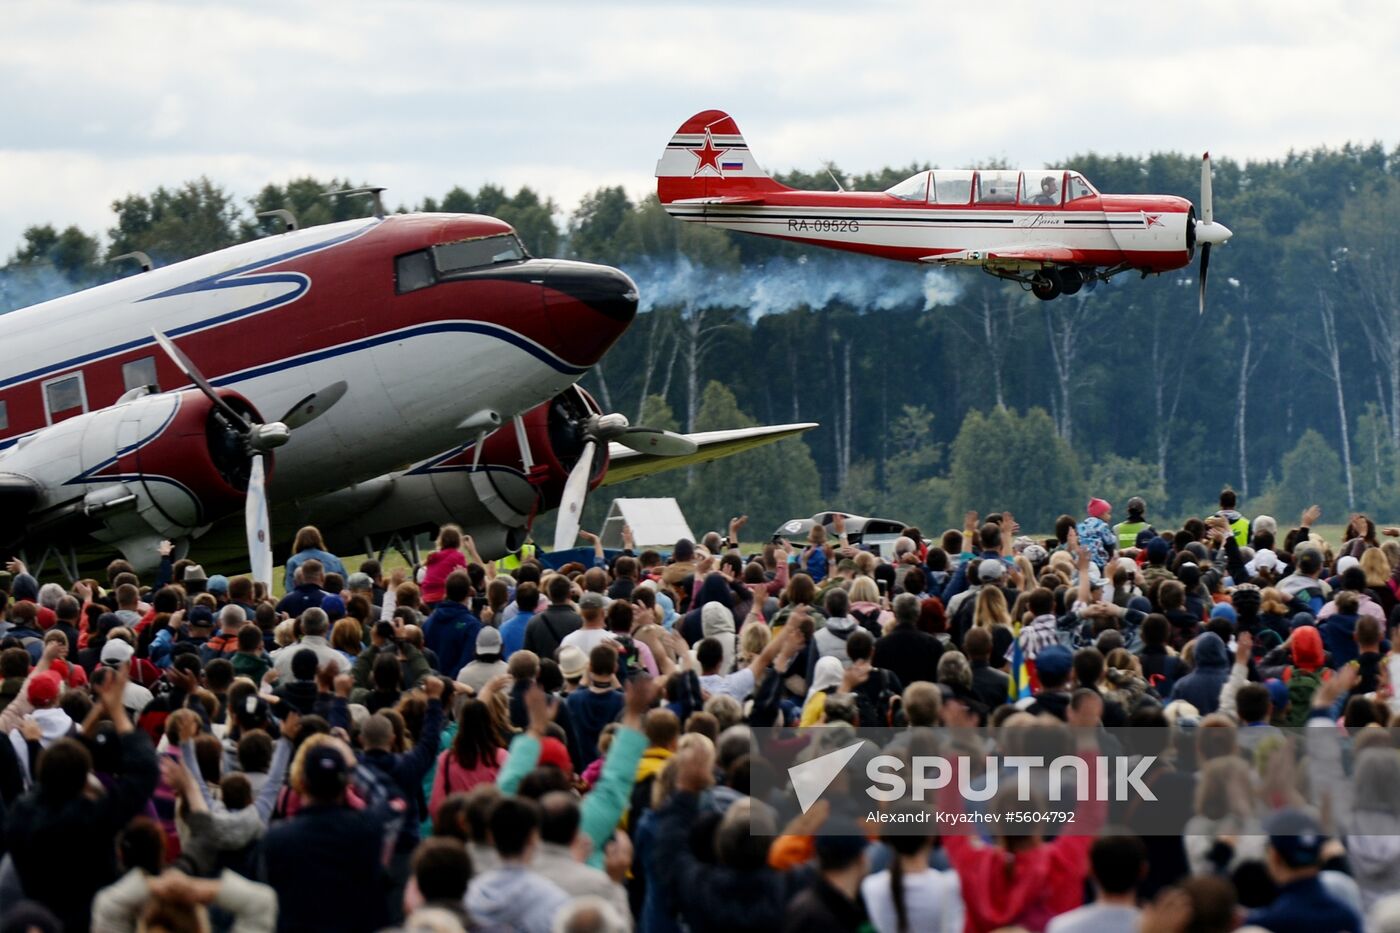 The Victory Is Where We Are aviation festival in Novosibirsk Region